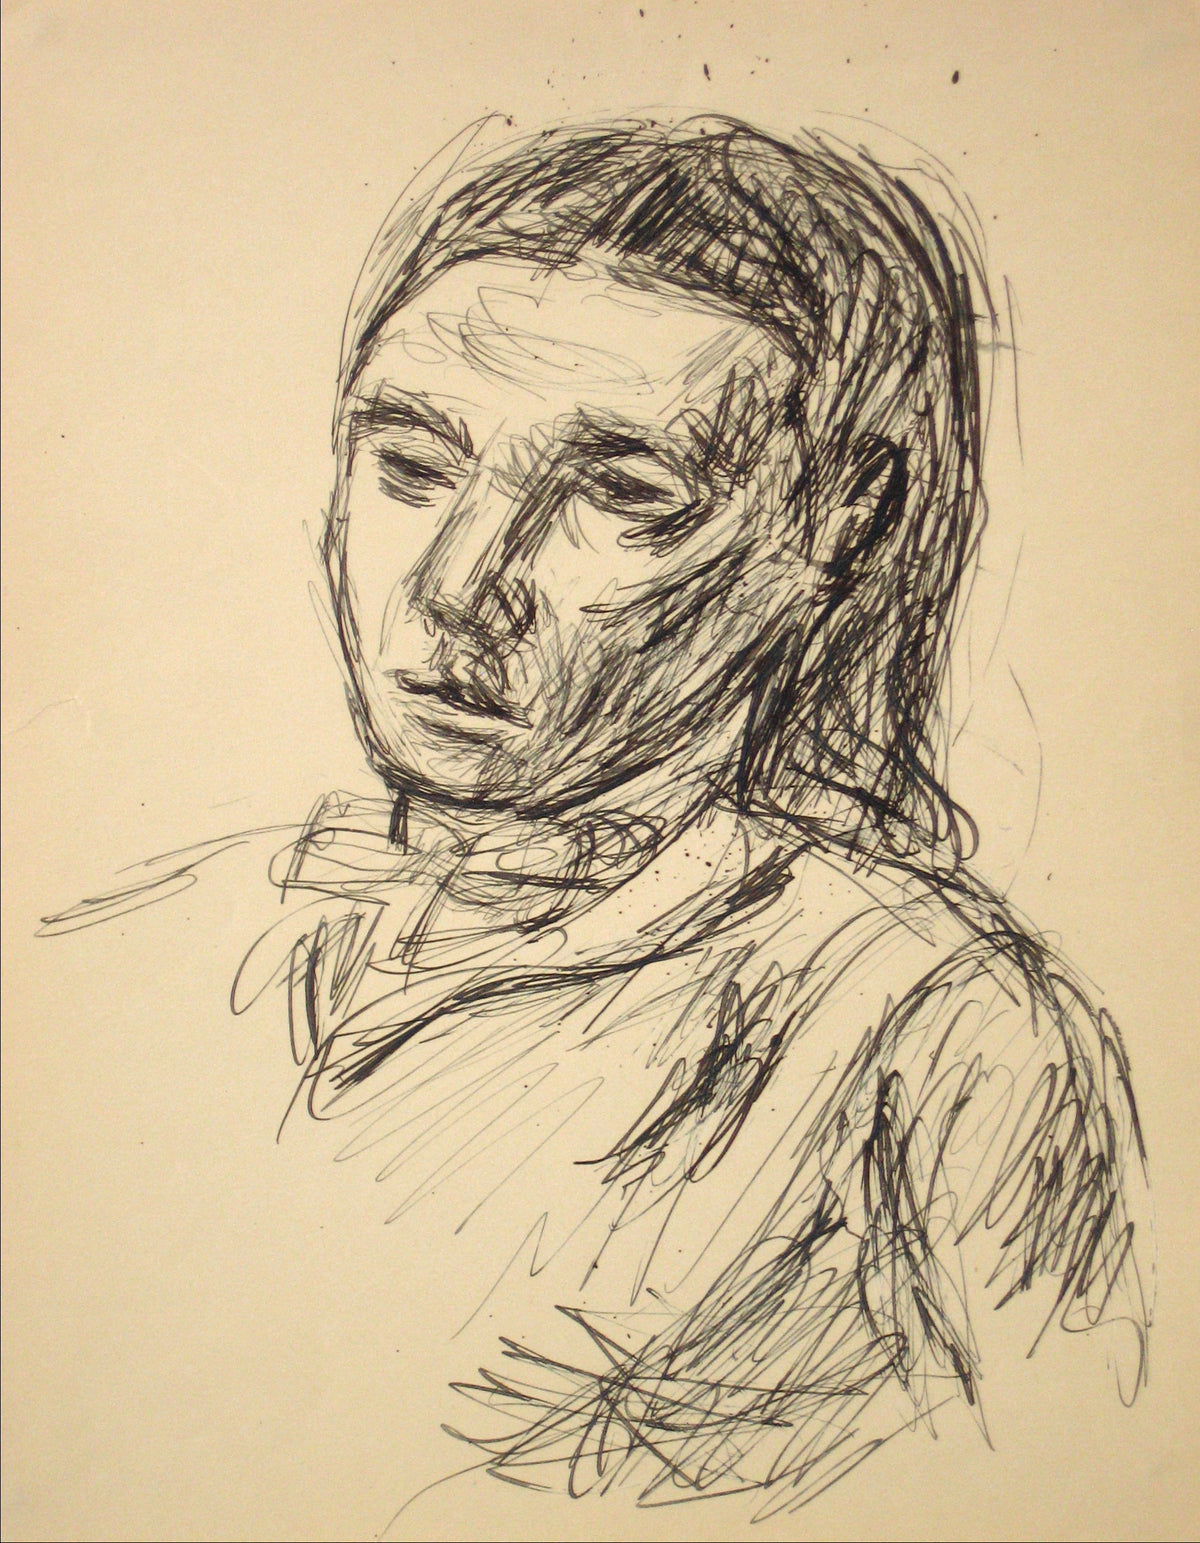 Portrait Drawing &lt;br&gt;Early to Mid 20th Century Ink on Paper &lt;br&gt;&lt;br&gt;#14285